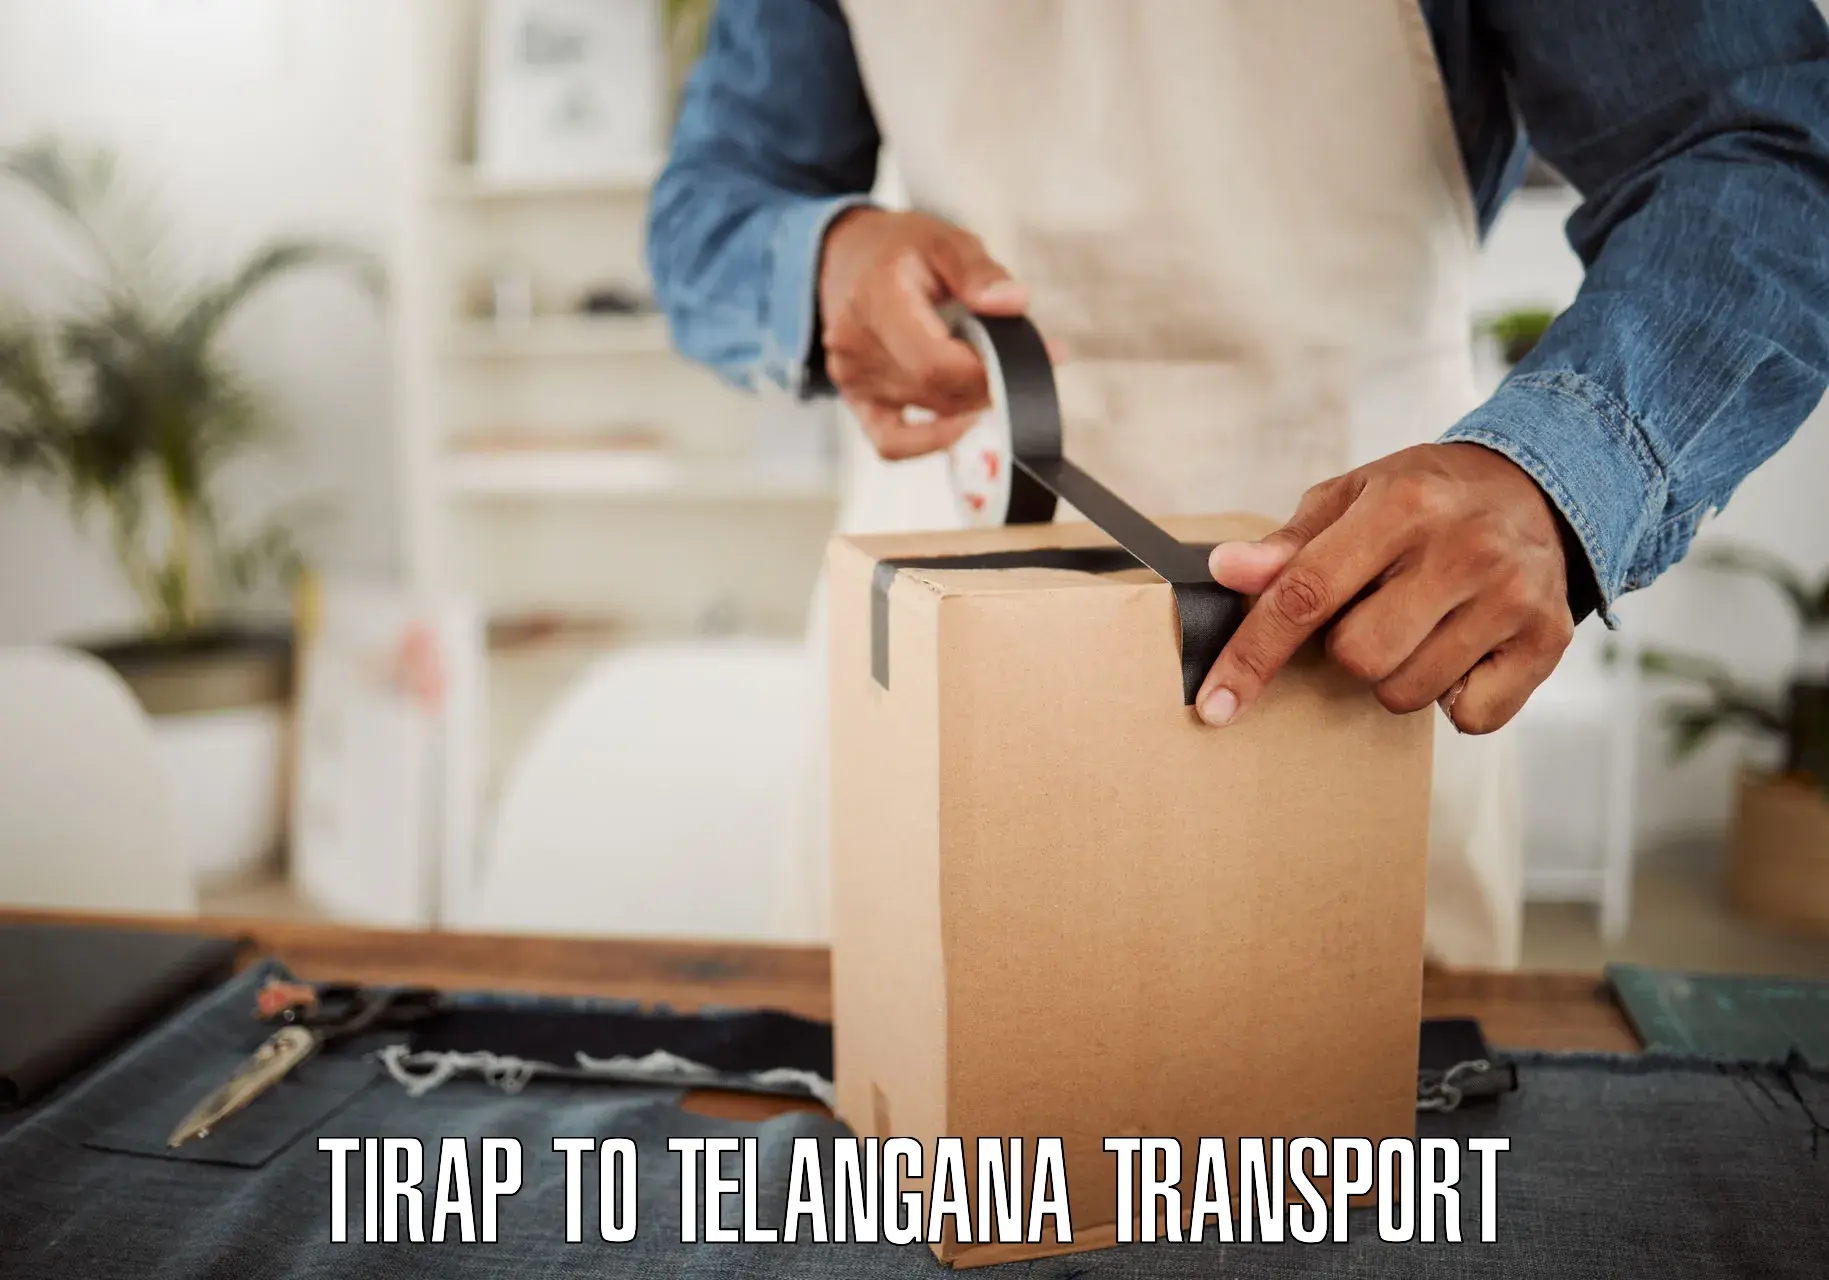 Transport bike from one state to another Tirap to Telangana